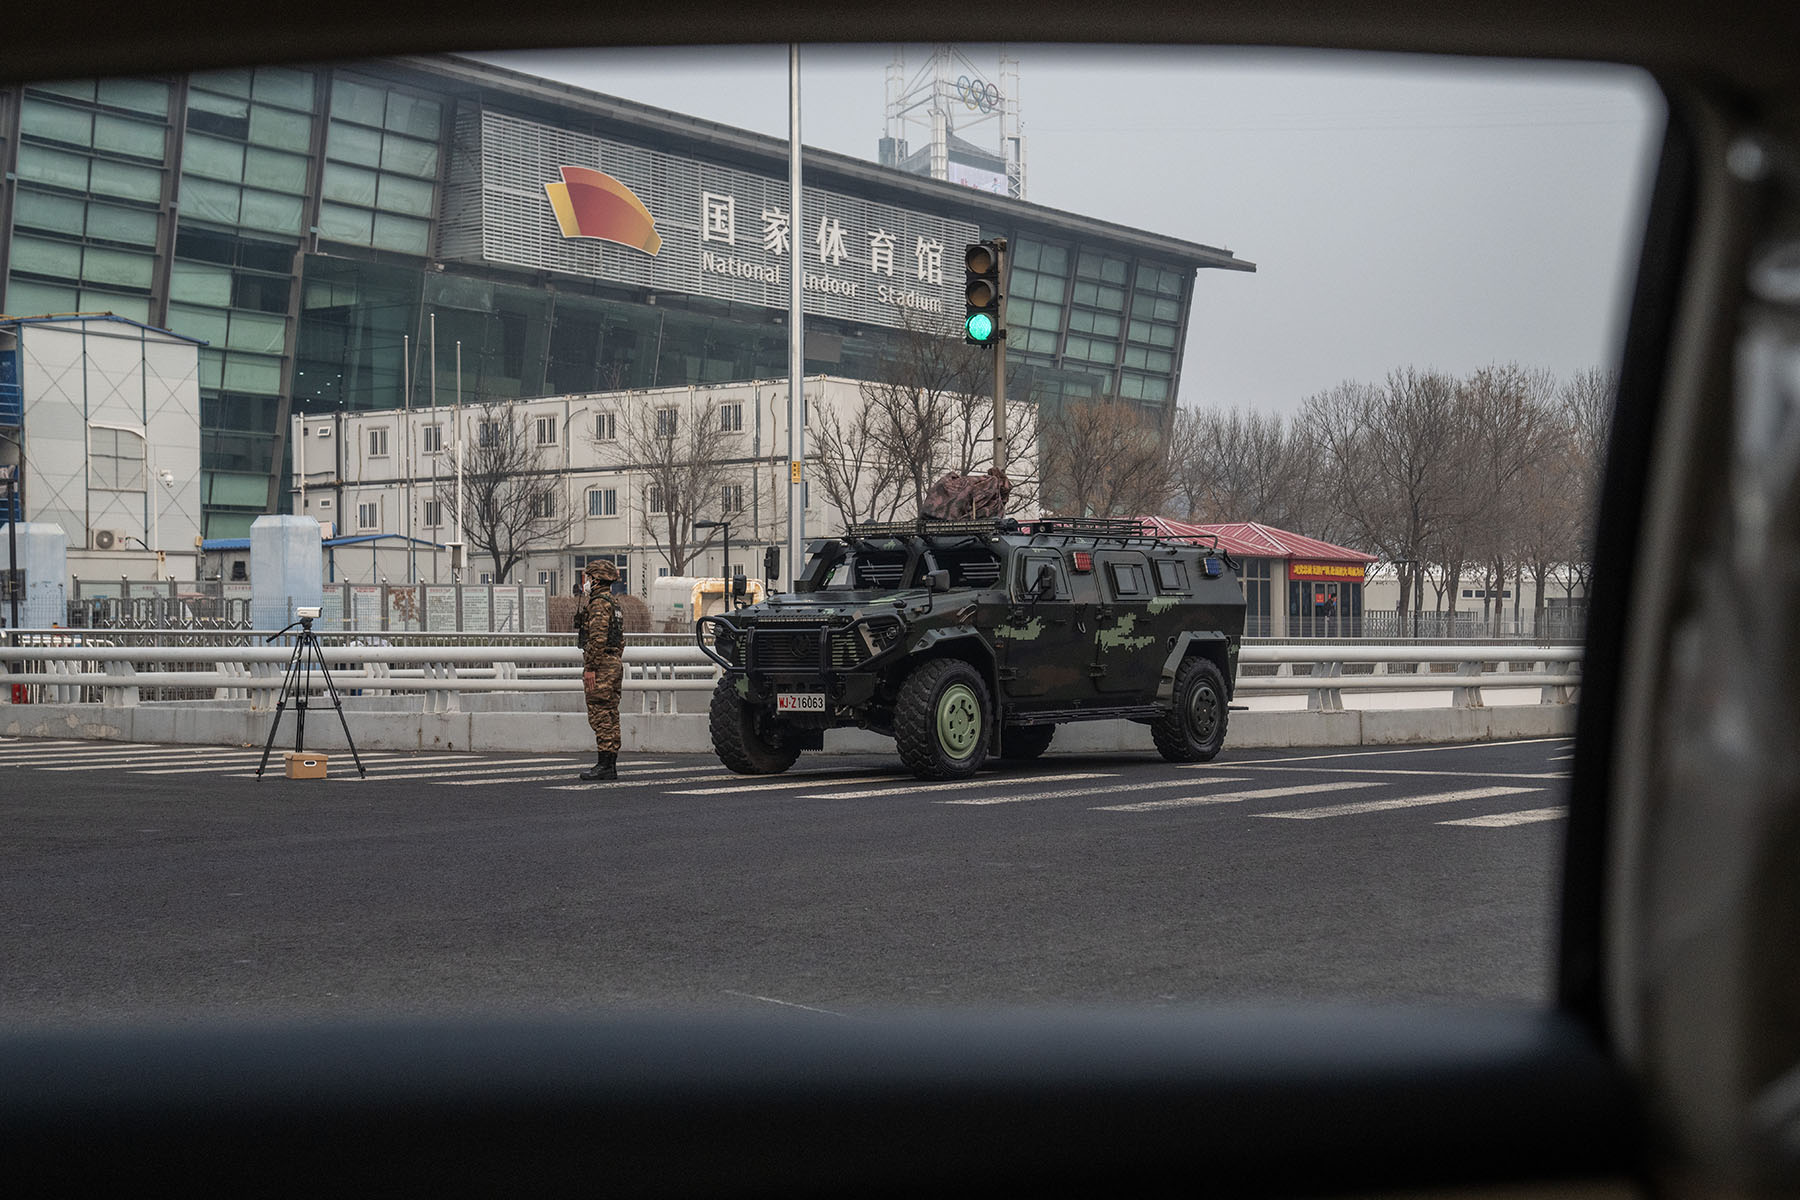 A soldier stands near an armored vehicle on an empty street.